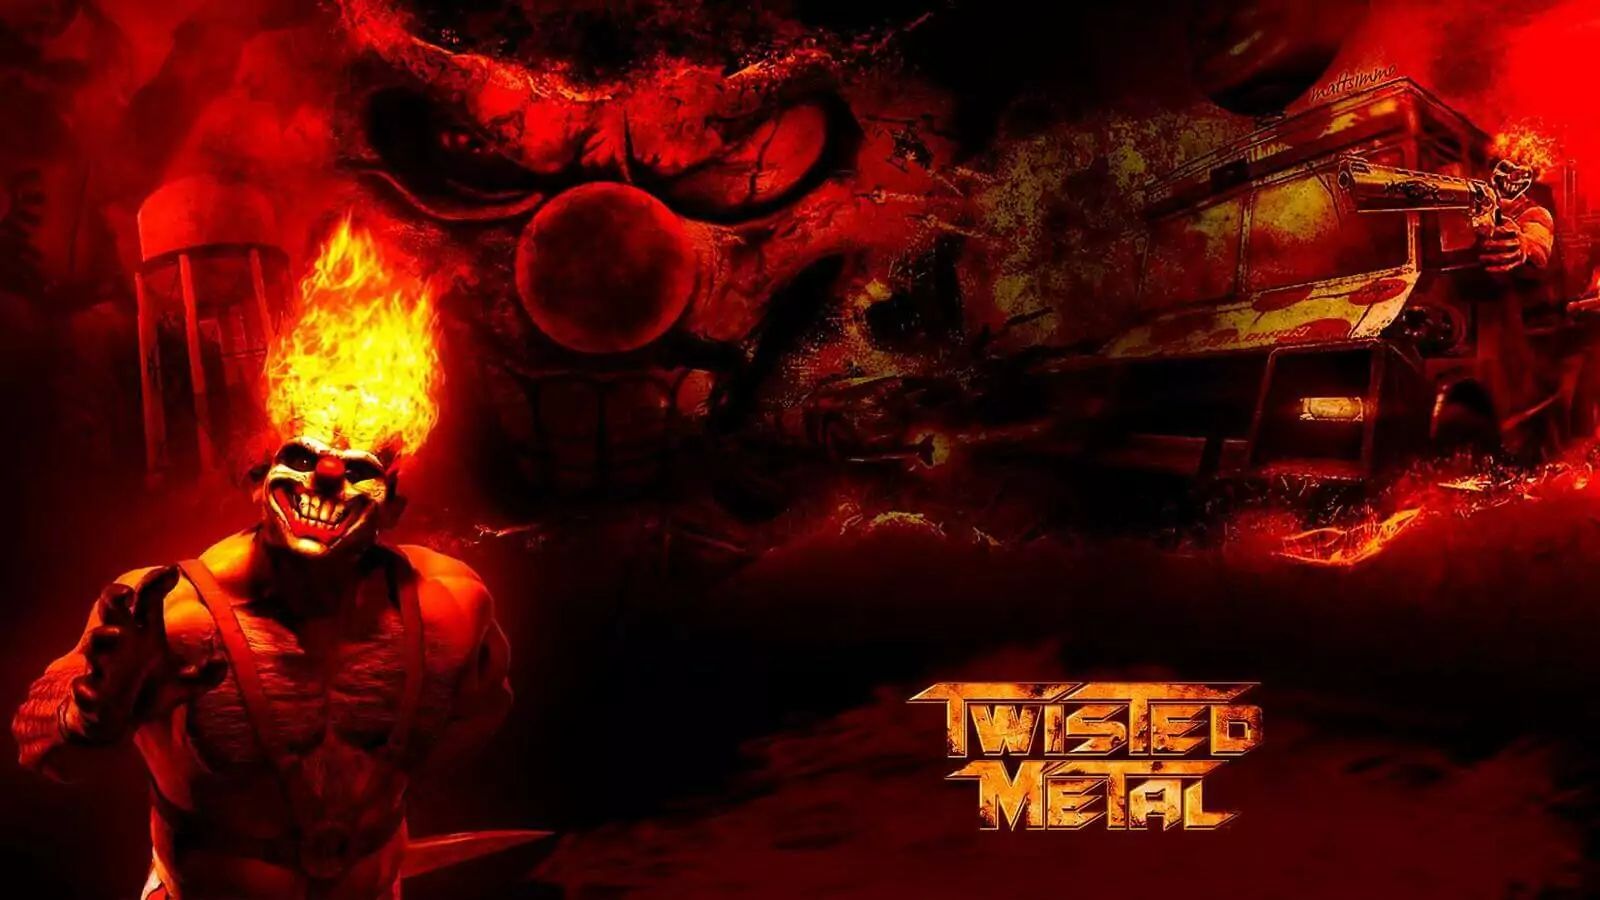 PlayStation Will Release Twisted Metal TV Series in 2023